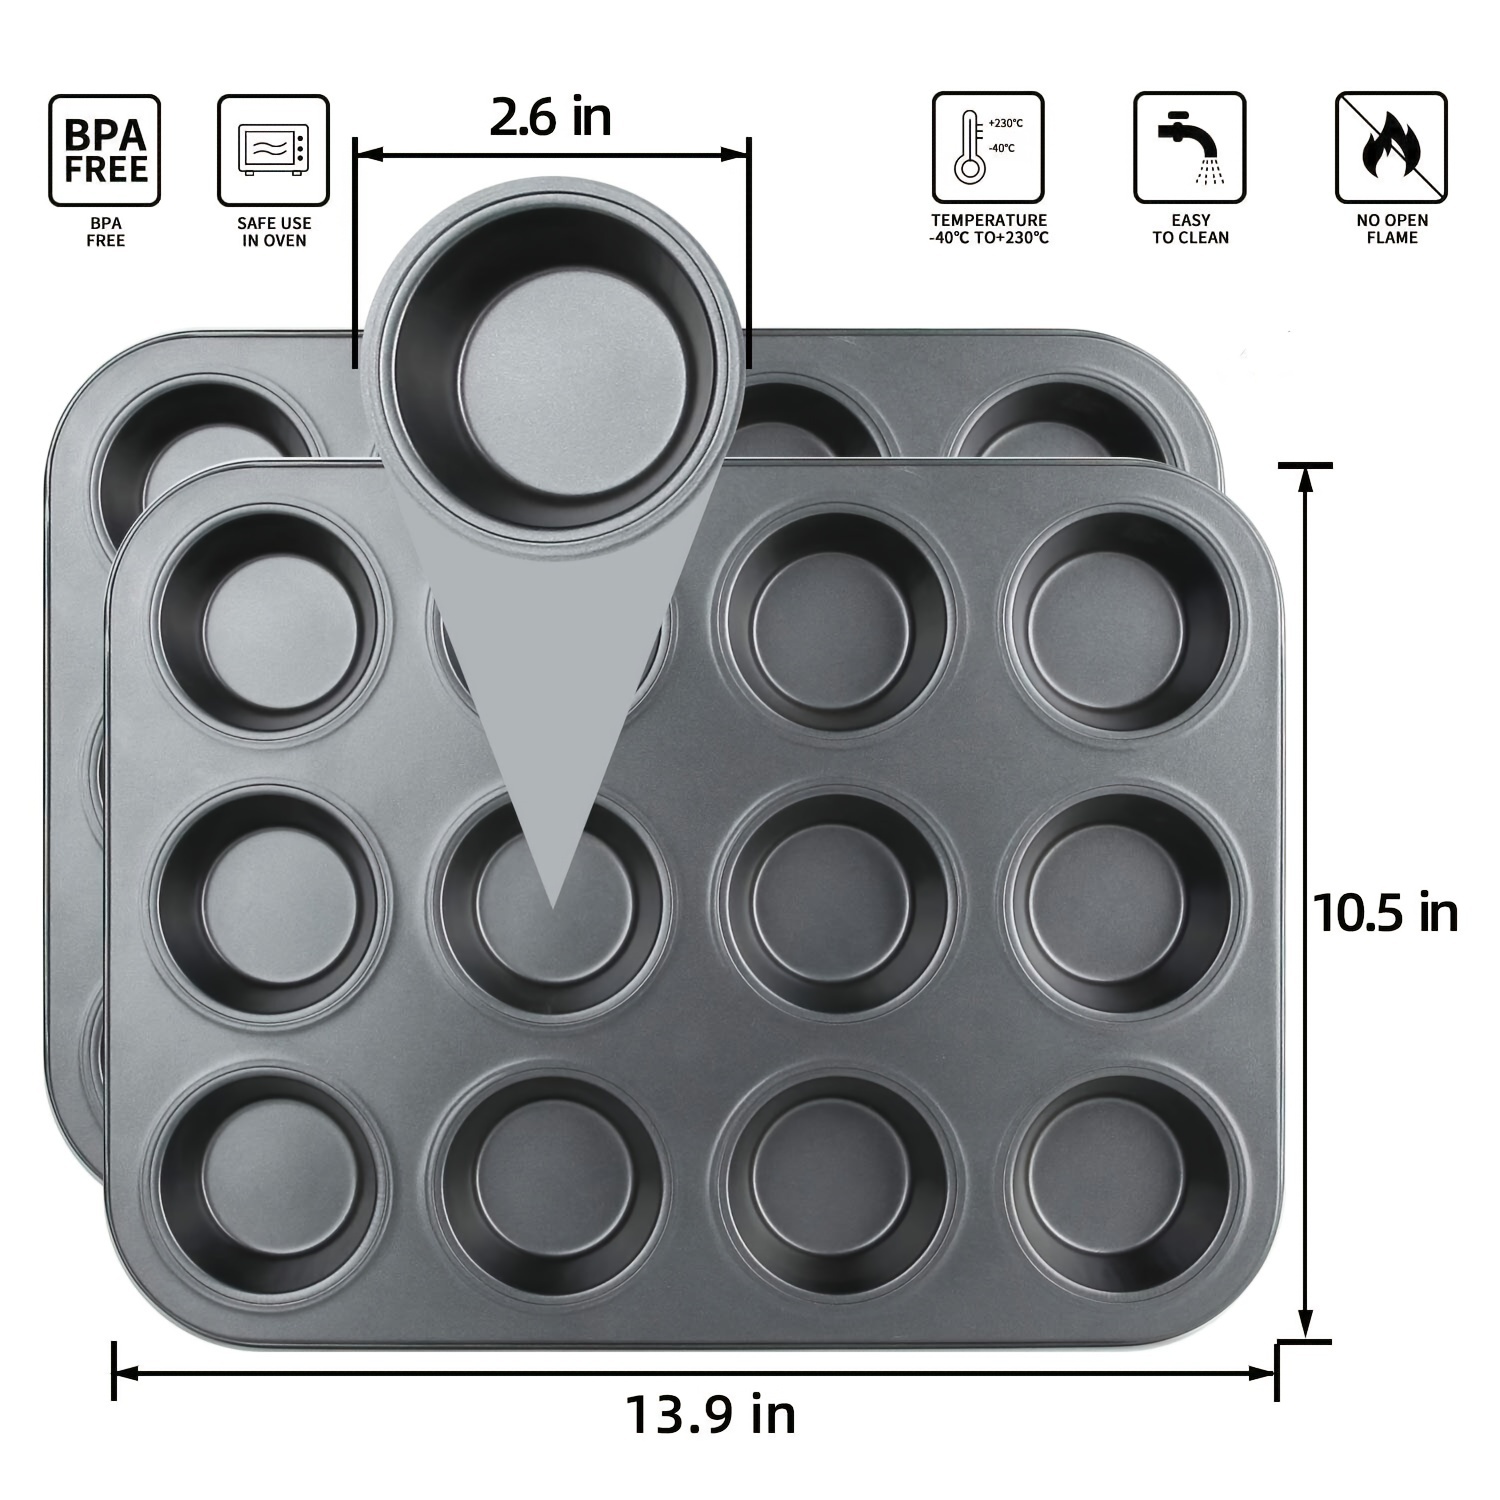 P&P CHEF Muffin Pan Cupcake Baking Pan Set of 2, 12 Cups Muffin Tin Tray,  Stainless Steel Muffin Pans for Baking Mini Cake Muffin Tart Quiche, Oven 